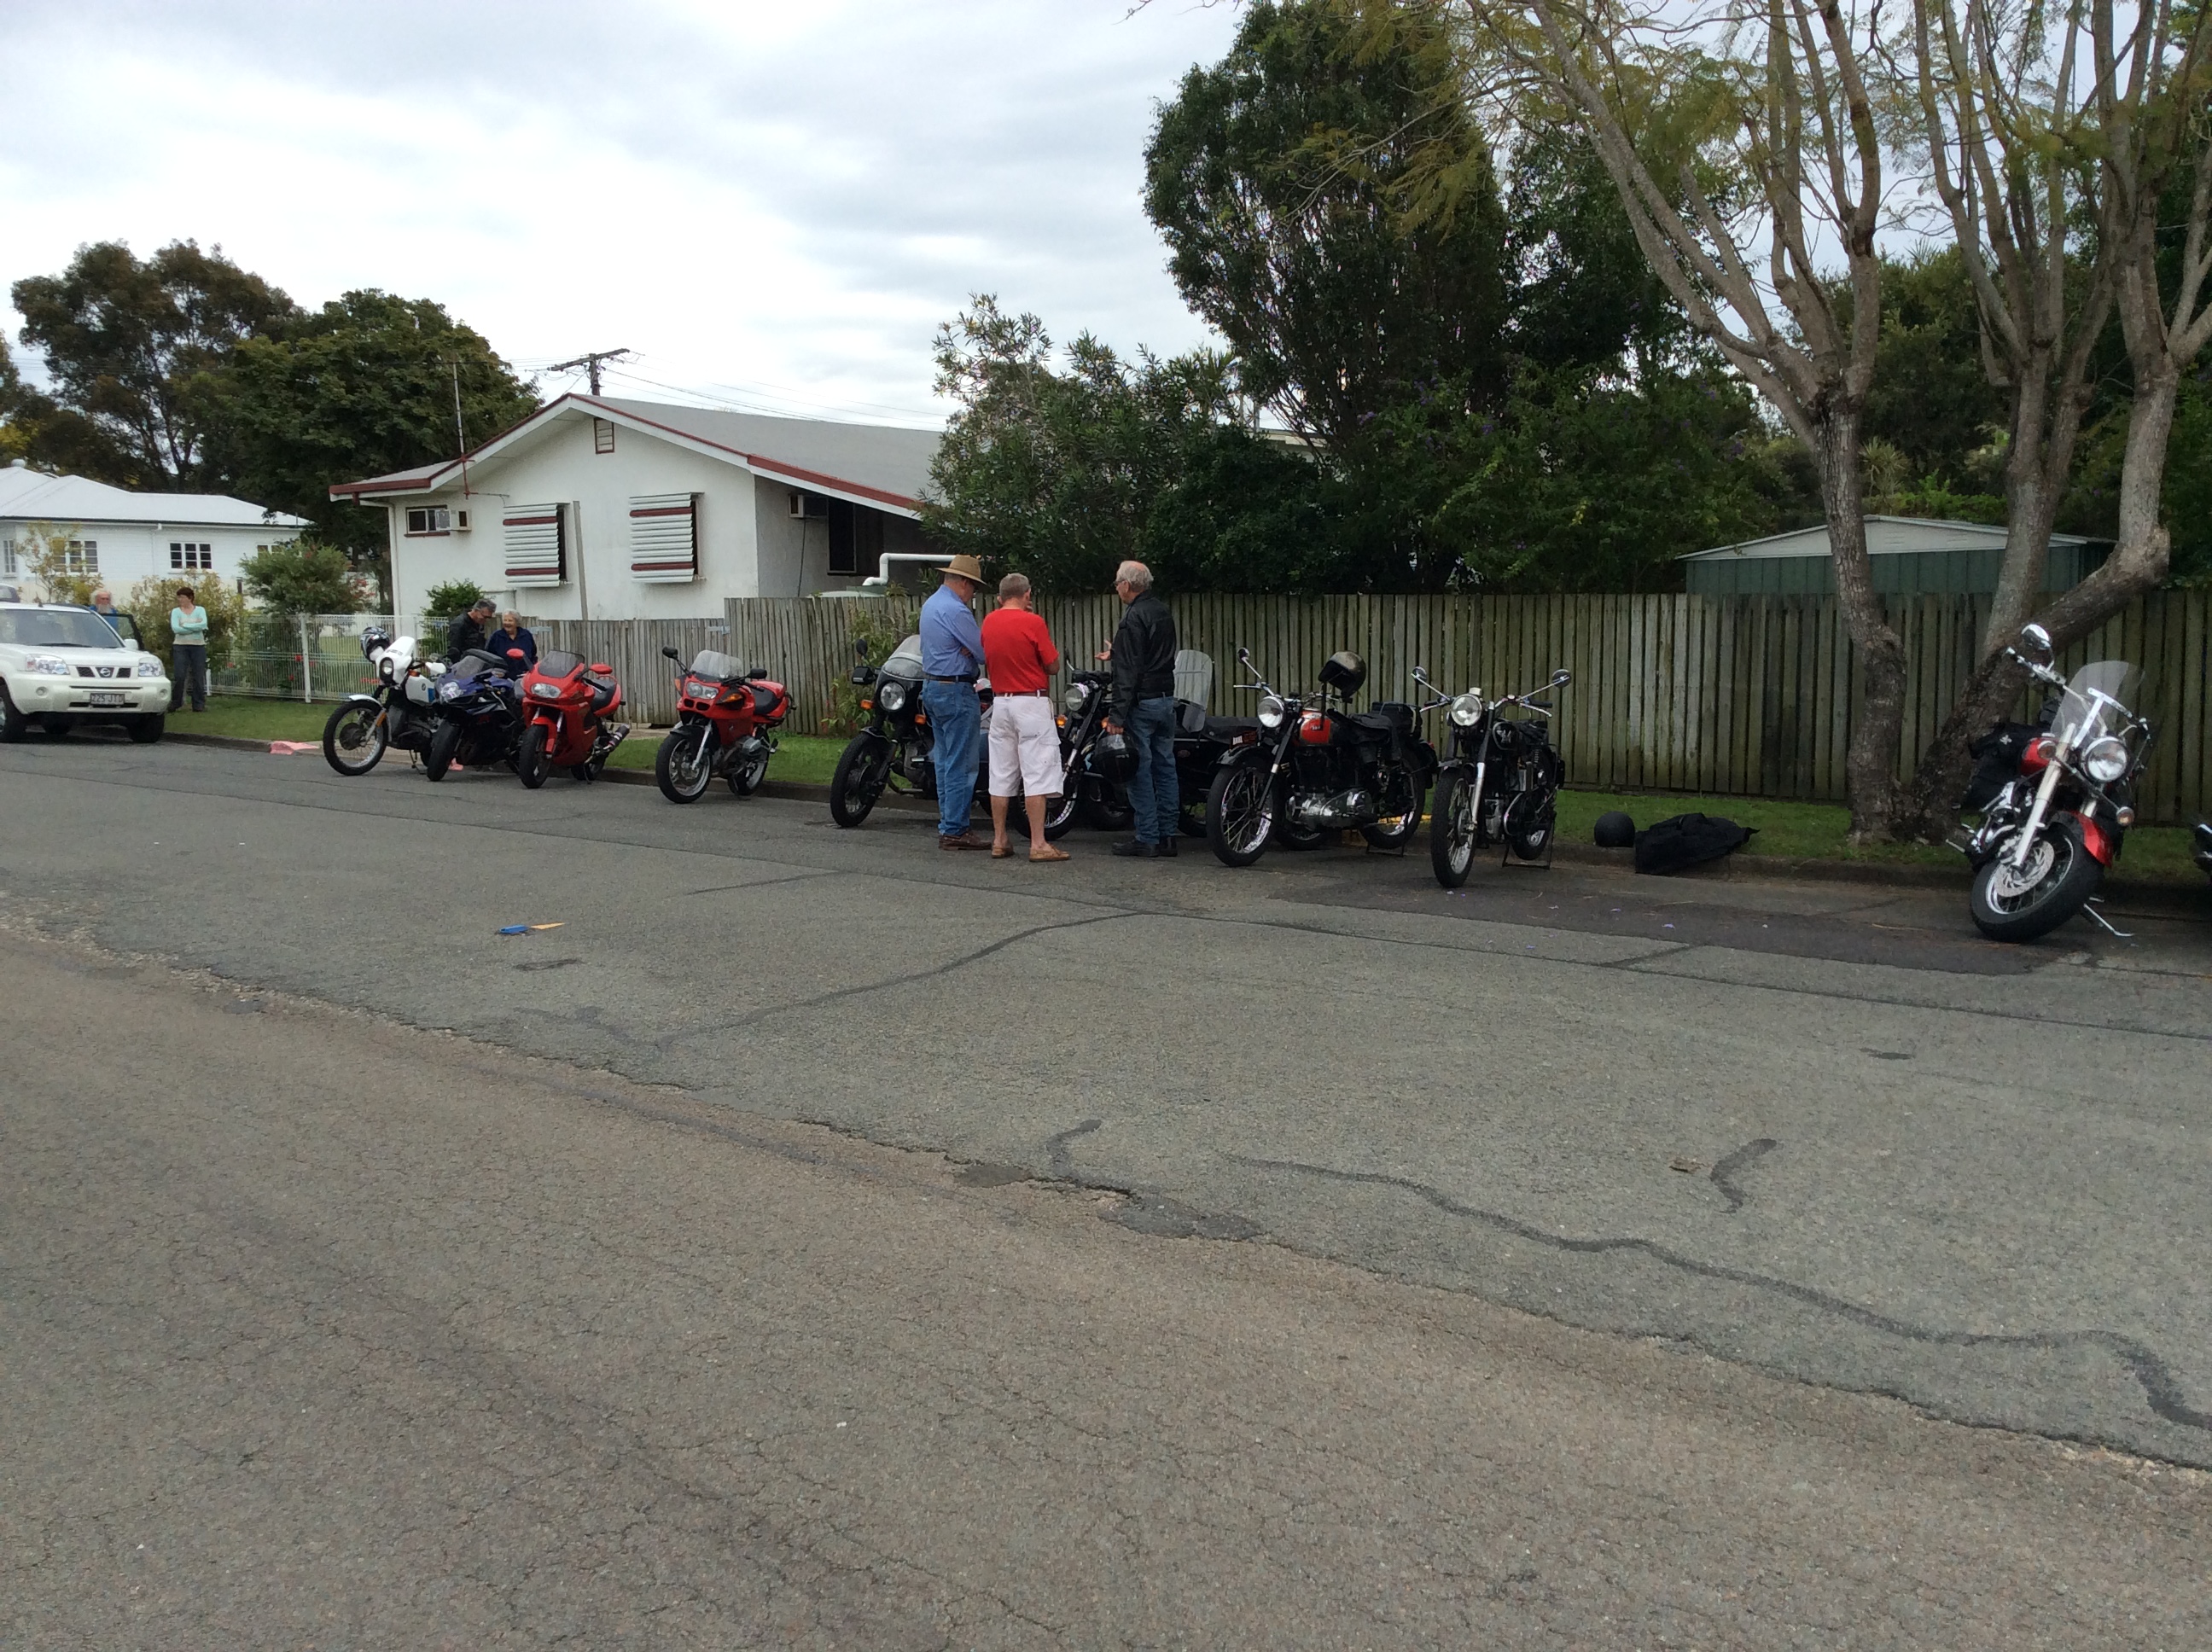 Bikes arrive and line up in front of the clubhouse.